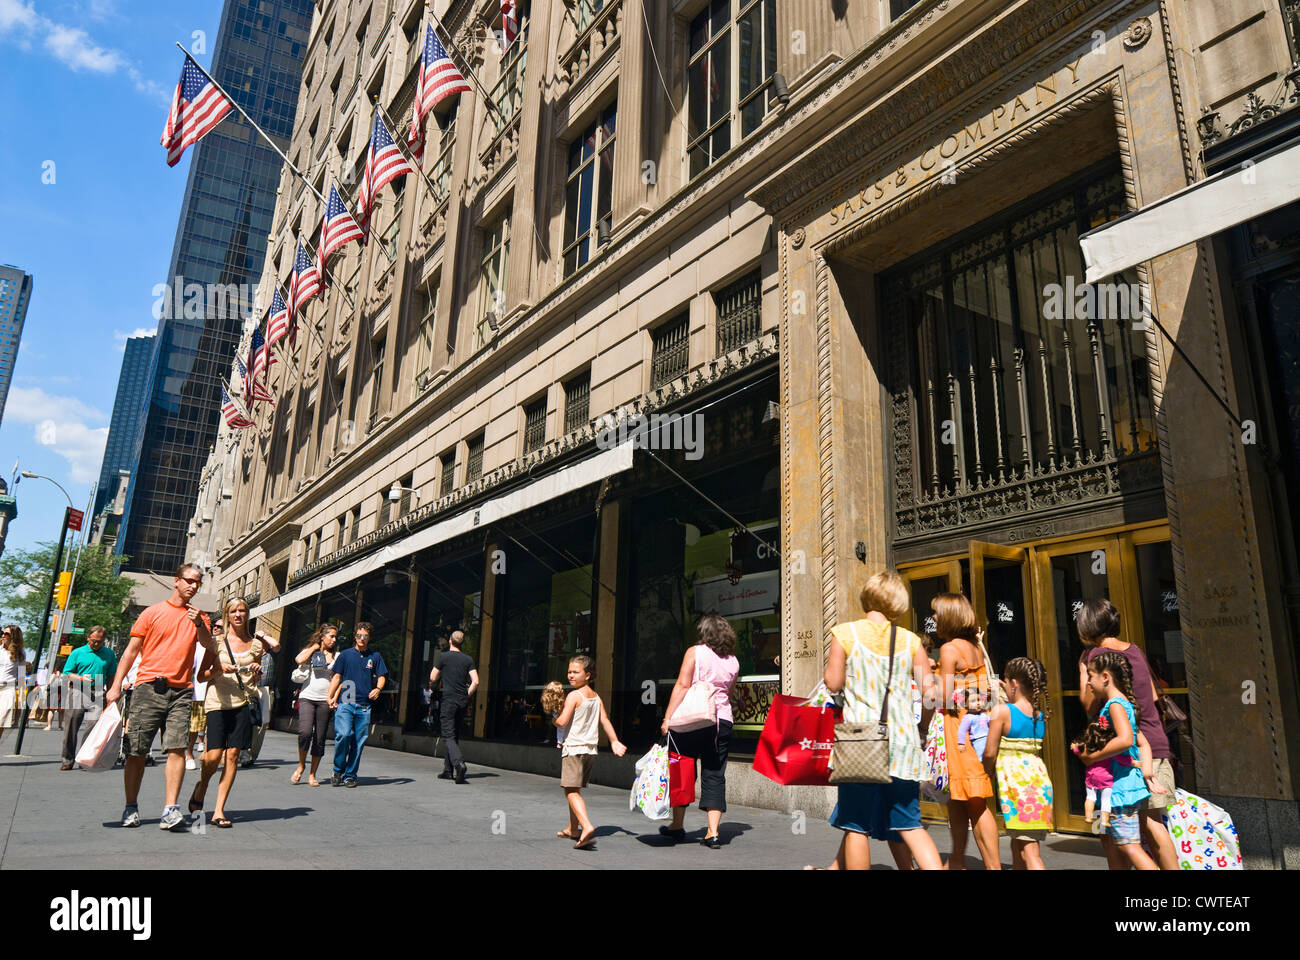 Saks Fifth Avenue Department Store and crowd of shoppers and tourists, Fifth Avenue, New York City. Stock Photo